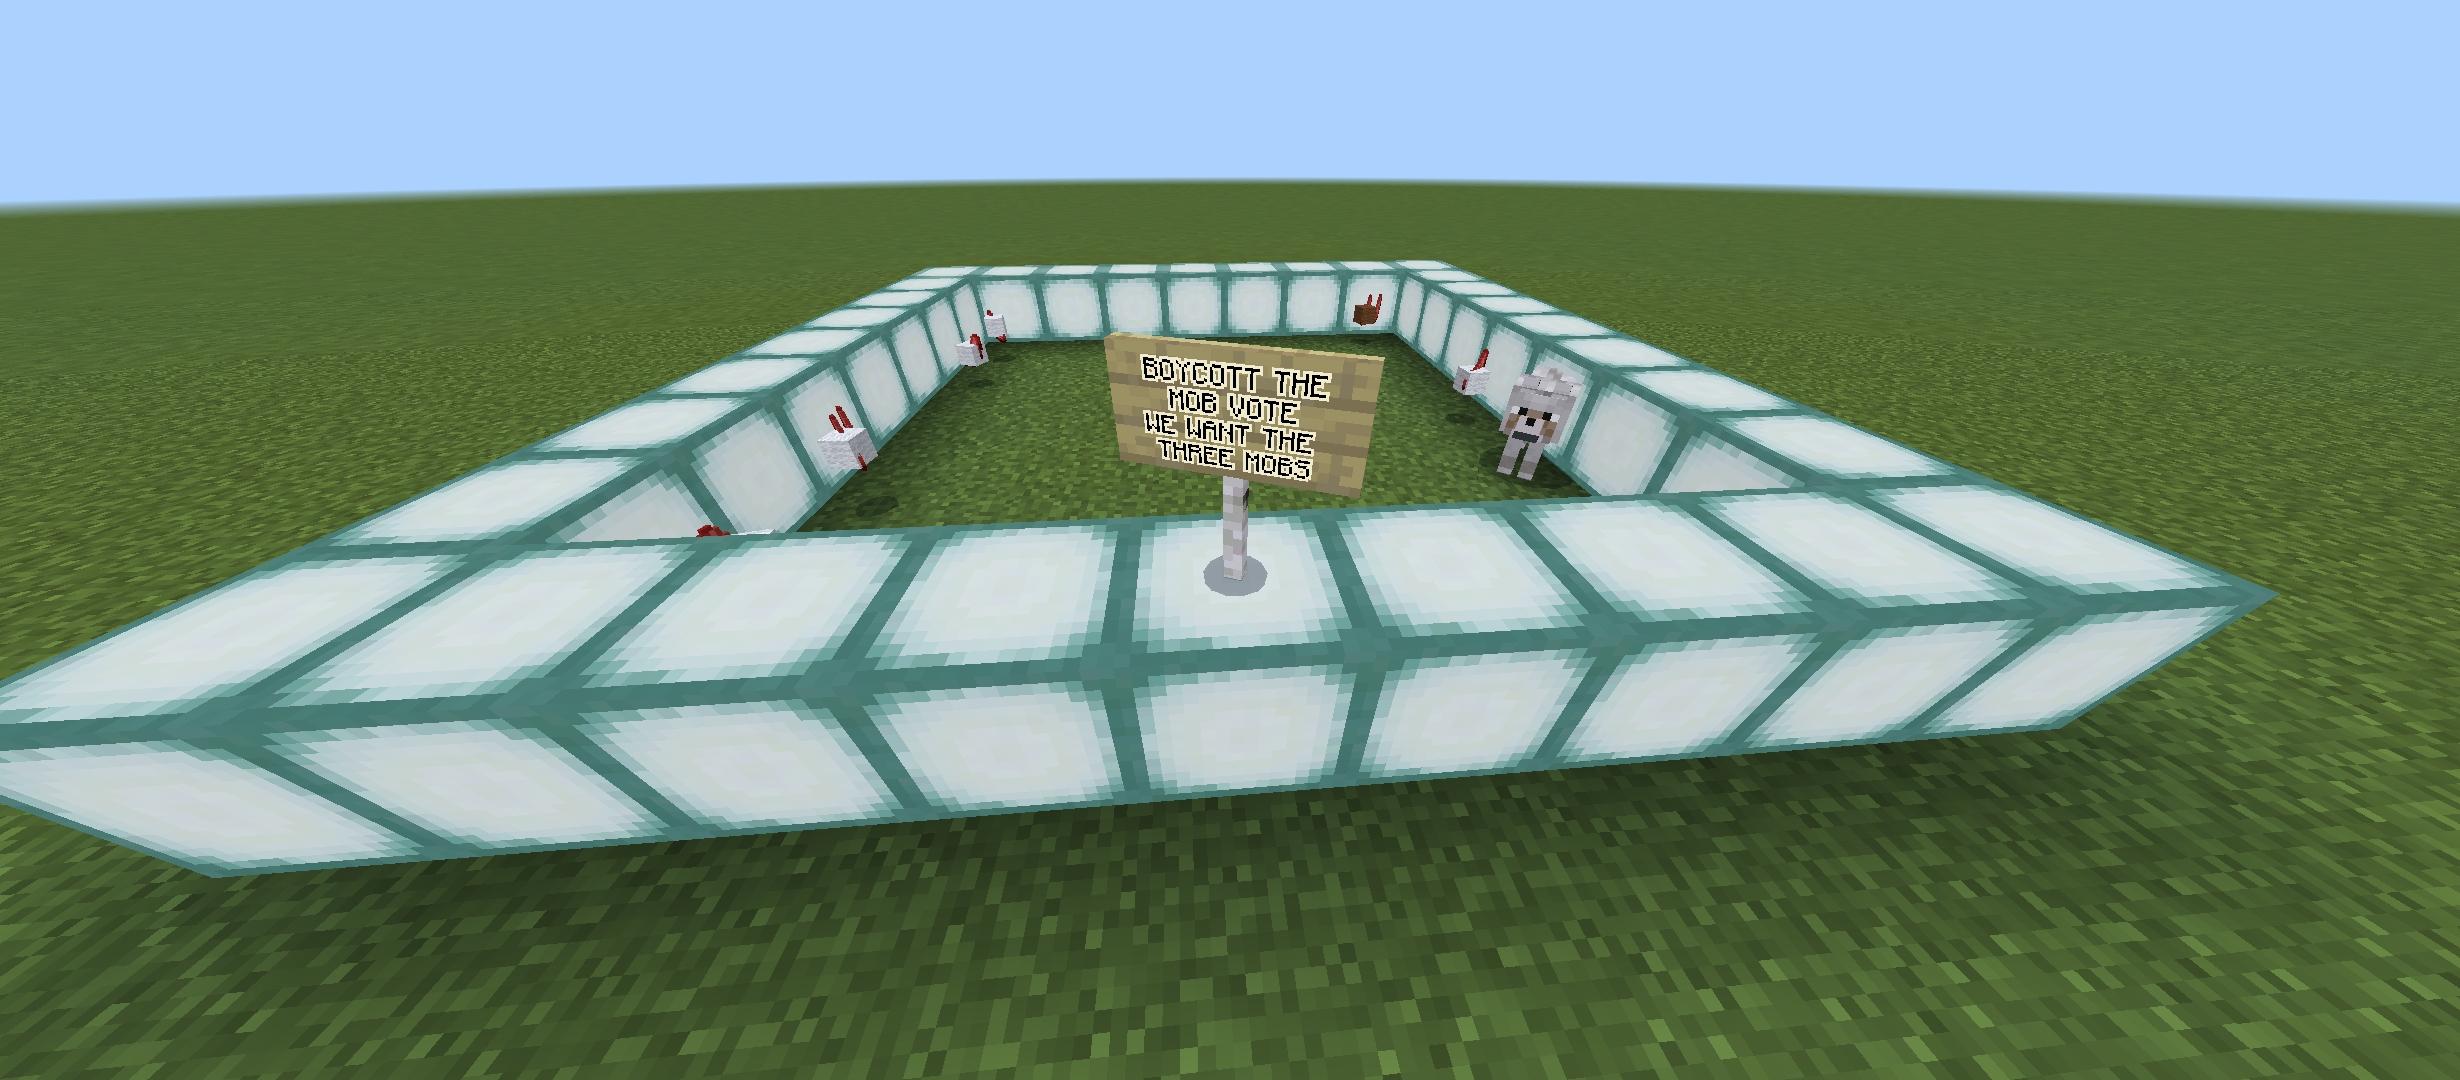 Minecraft Memes - "Can Wolves Jump Fences in Minecraft?" #StopTheMobVote